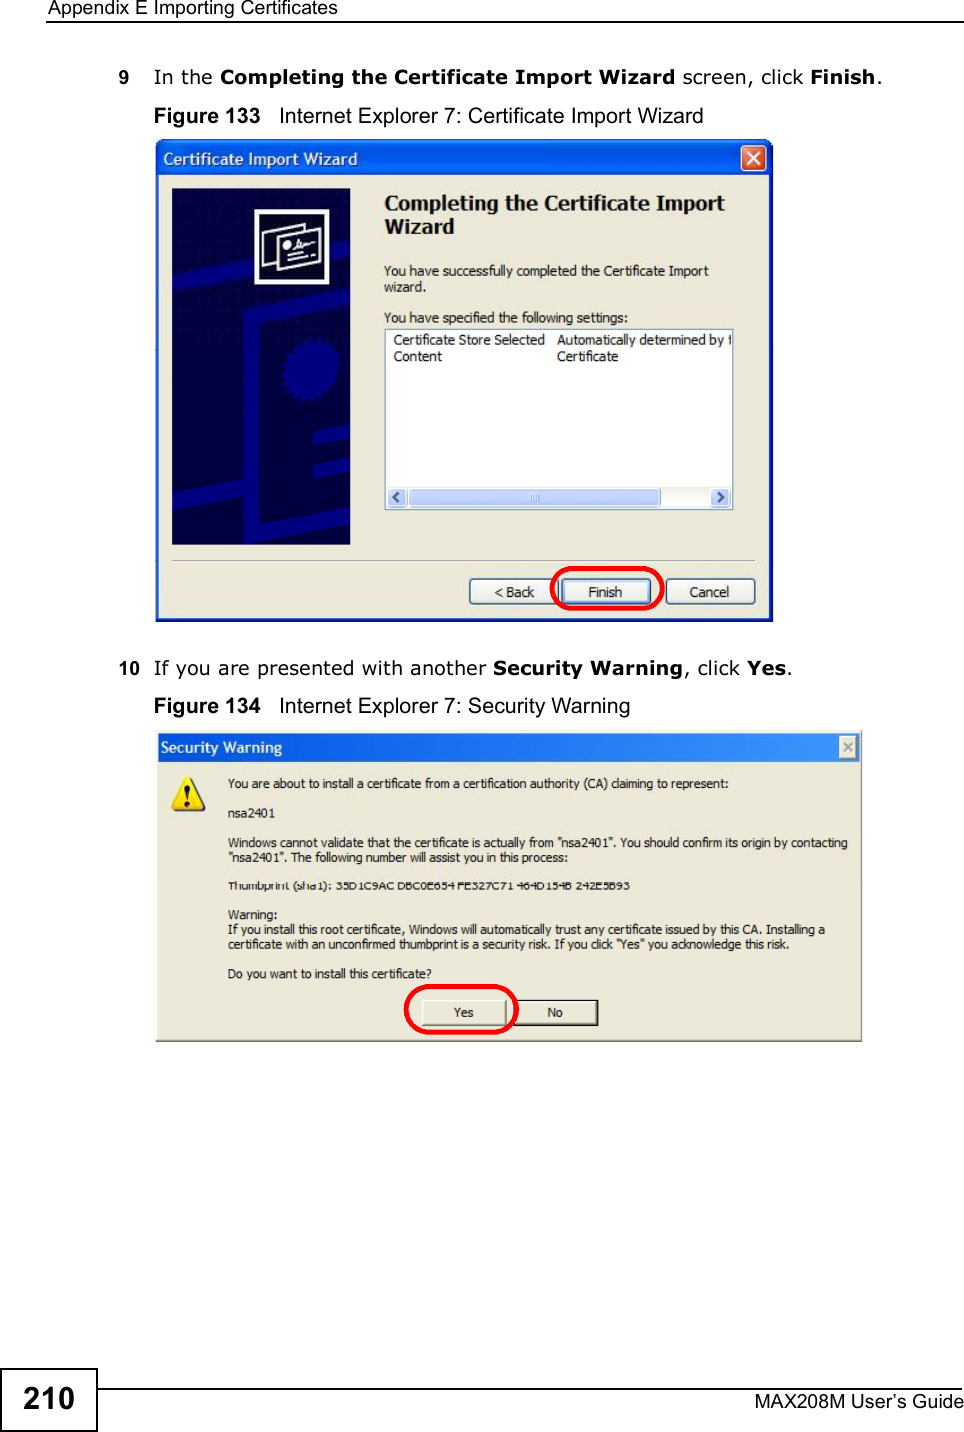 Appendix EImporting CertificatesMAX208M User s Guide2109In the Completing the Certificate Import Wizard screen, click Finish.Figure 133   Internet Explorer 7: Certificate Import Wizard10 If you are presented with another Security Warning, click Yes.Figure 134   Internet Explorer 7: Security Warning